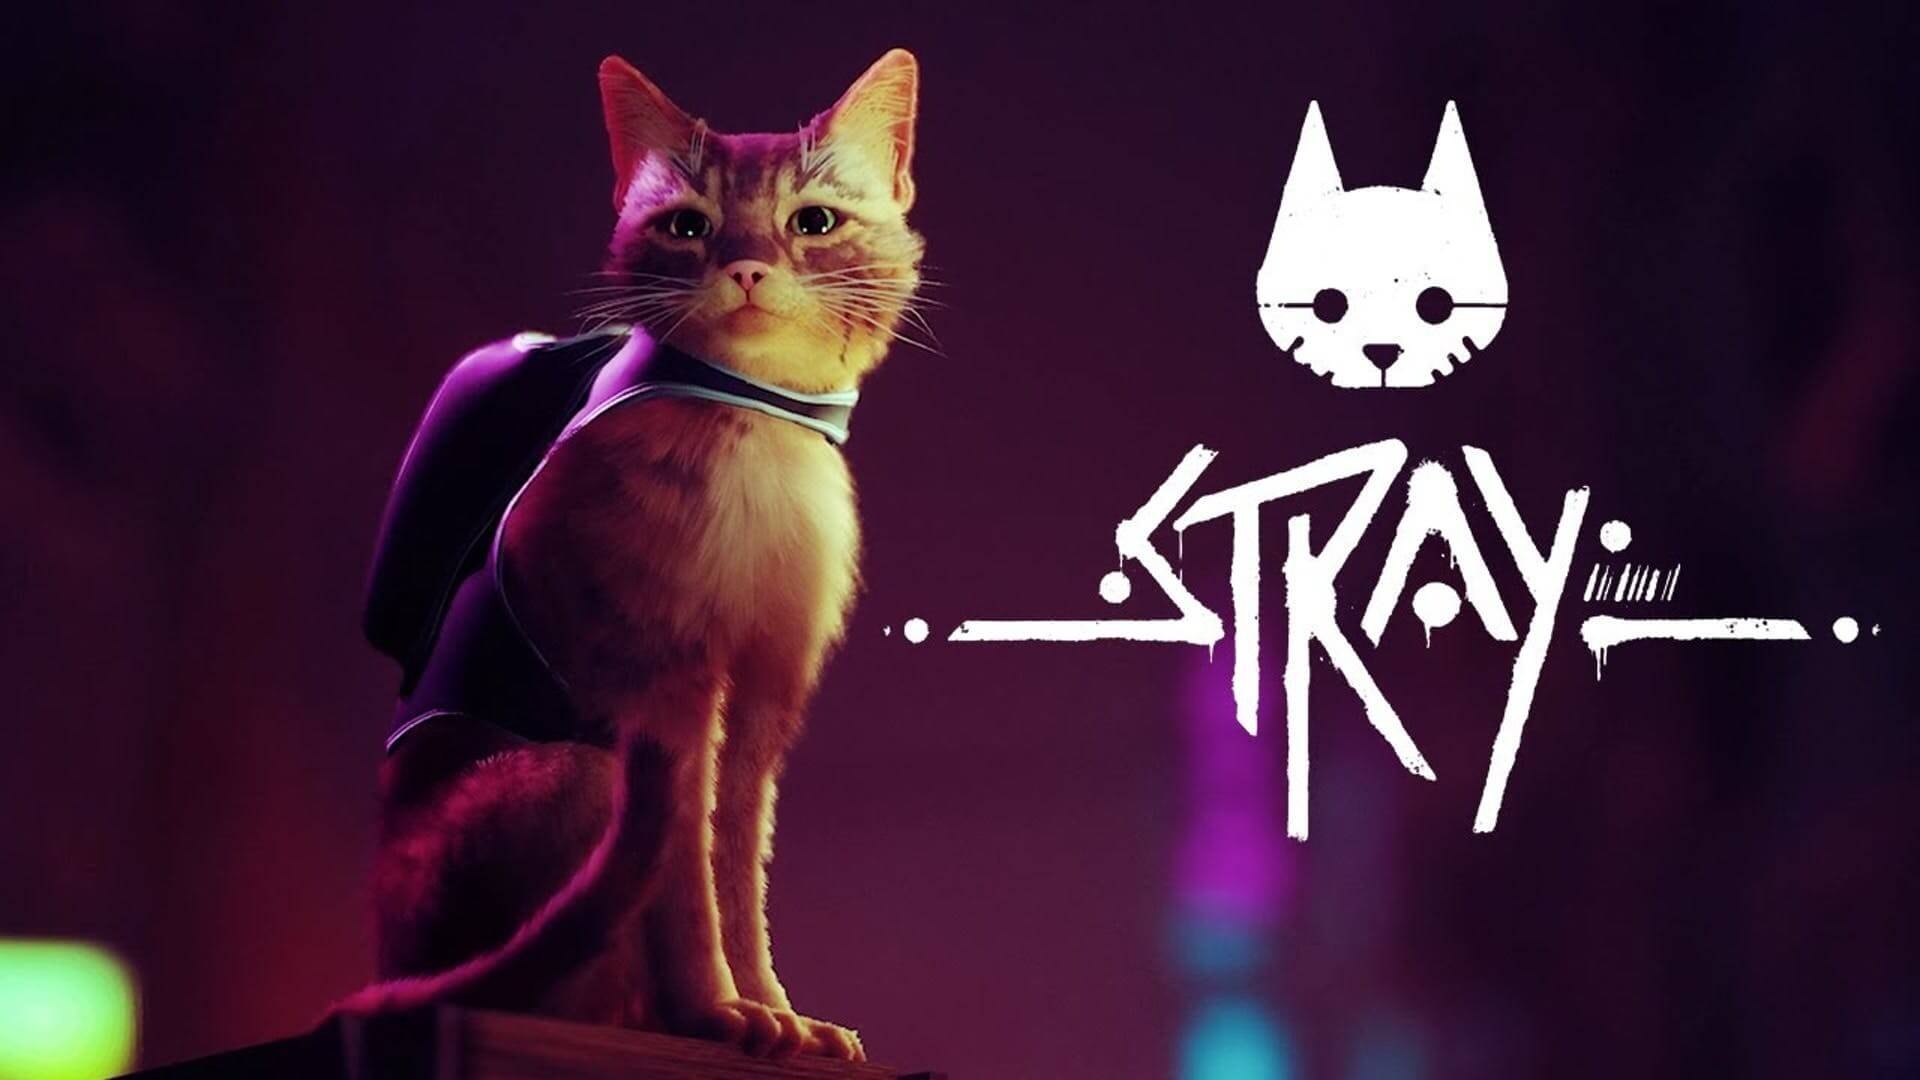 Stray (Game): One of a small feline colony living in a disused industrial district, Game character. 1920x1080 Full HD Wallpaper.